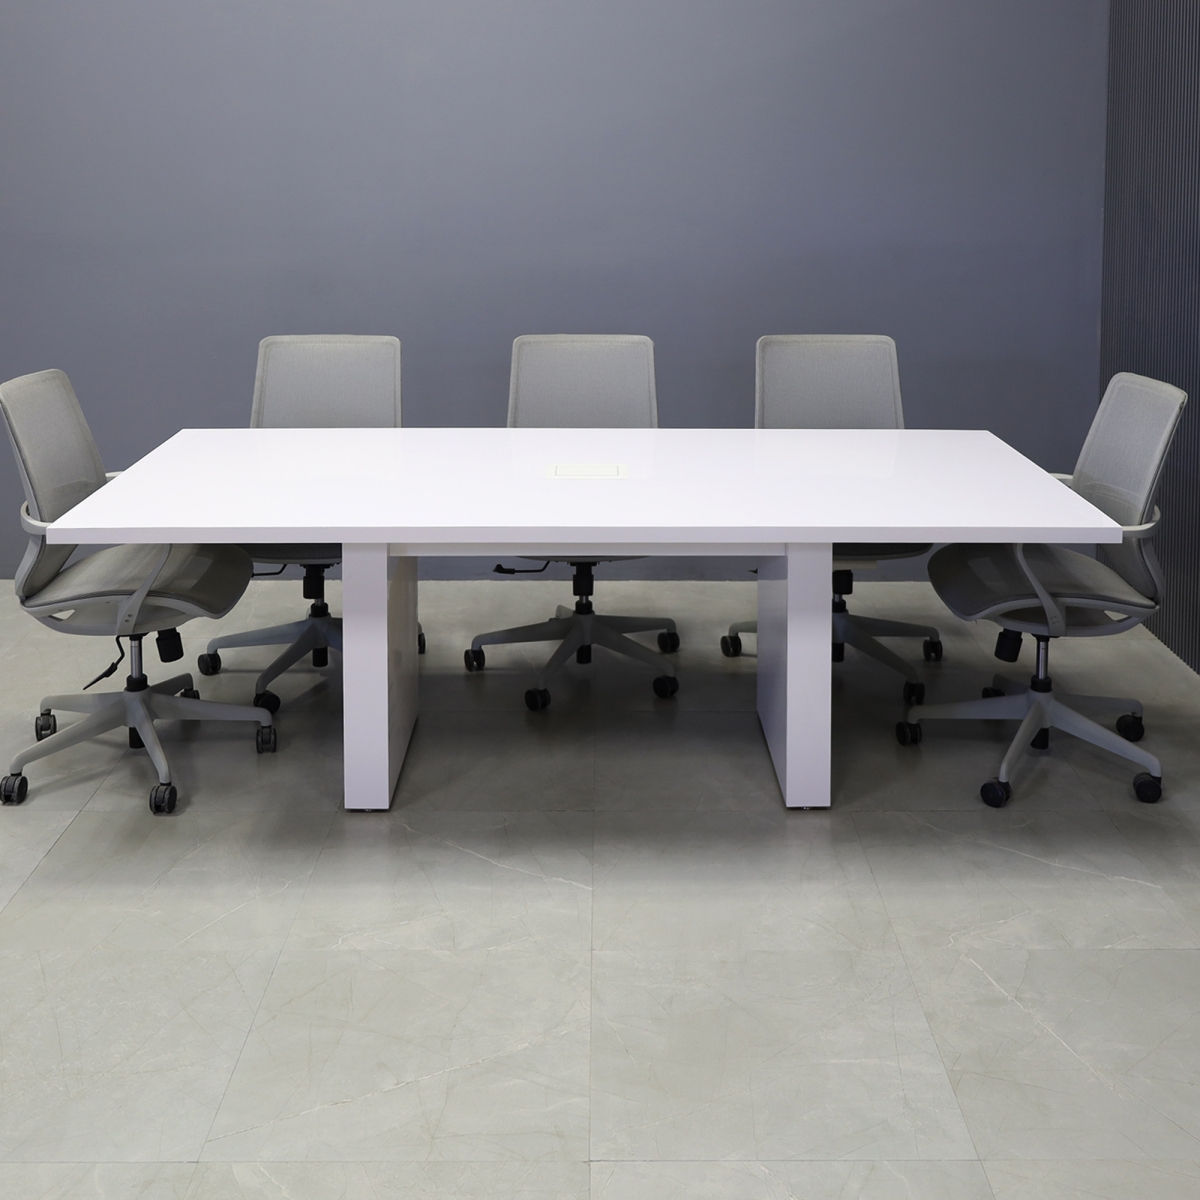 Newton Rectangular Shape Conference Table in White Gloss Laminate - 90 In. - Stock #44